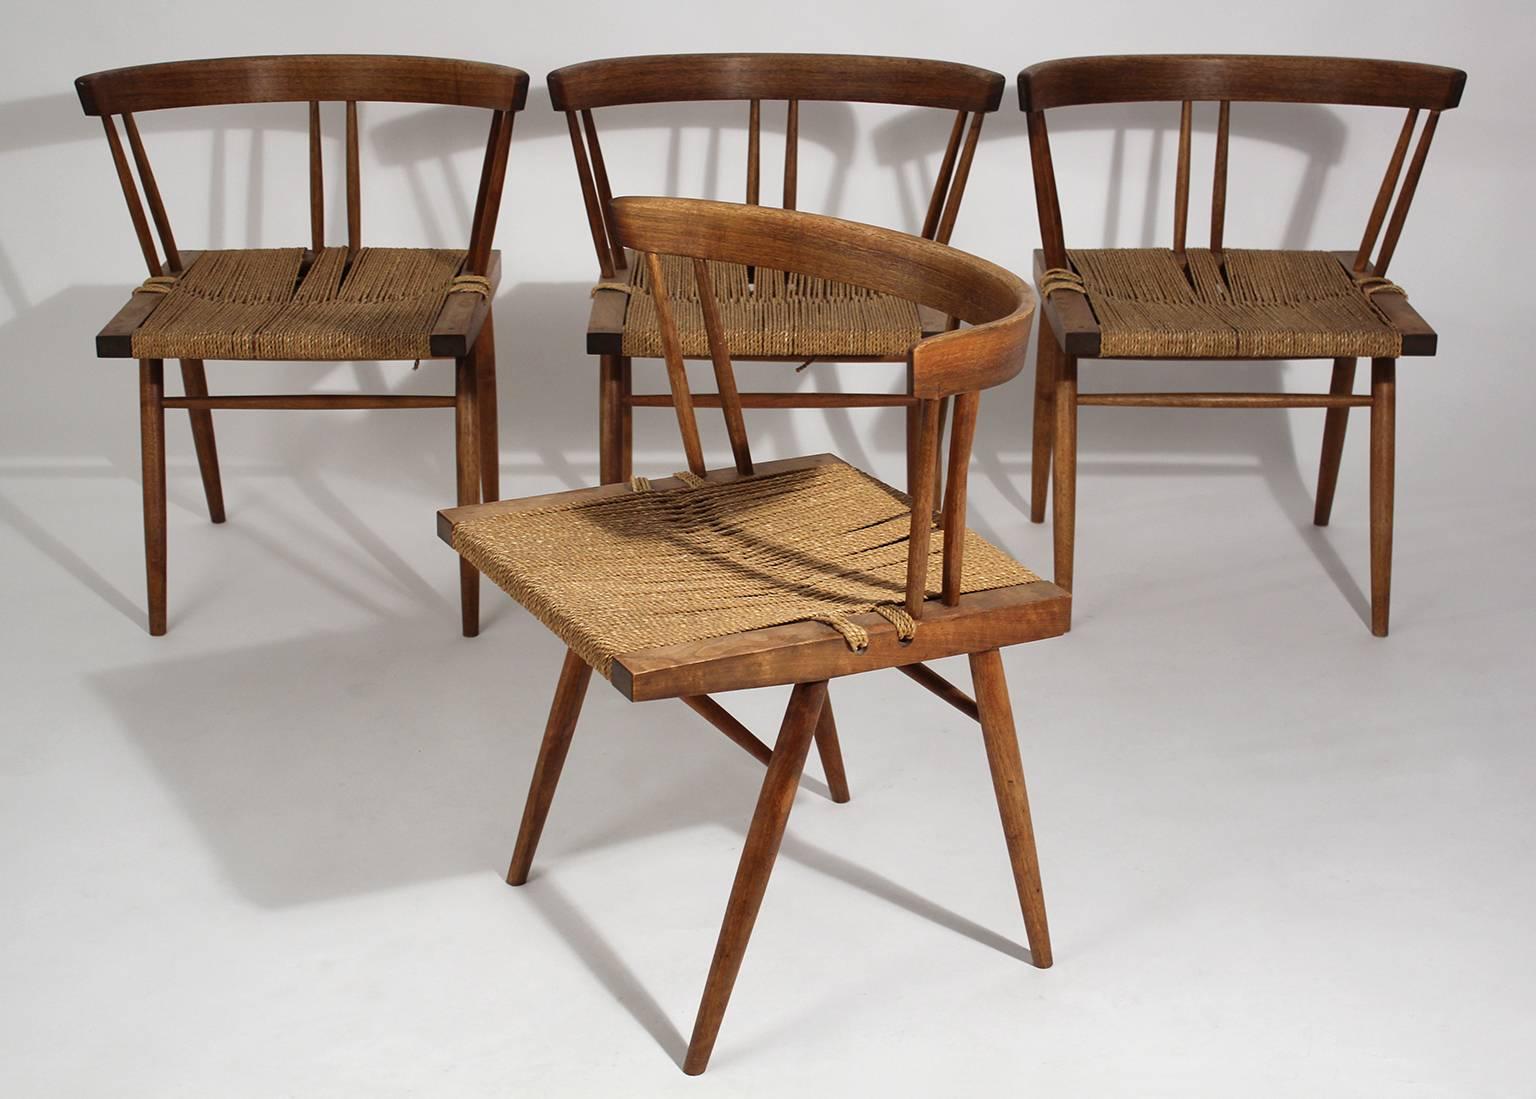 Beautiful set of four original George Nakashima grass seat walnut chairs, dating from 1950. These chairs are 100% original and unrestored. They are in very nice original condition. Very sturdy. Comes with original paperwork from George Nakashima,